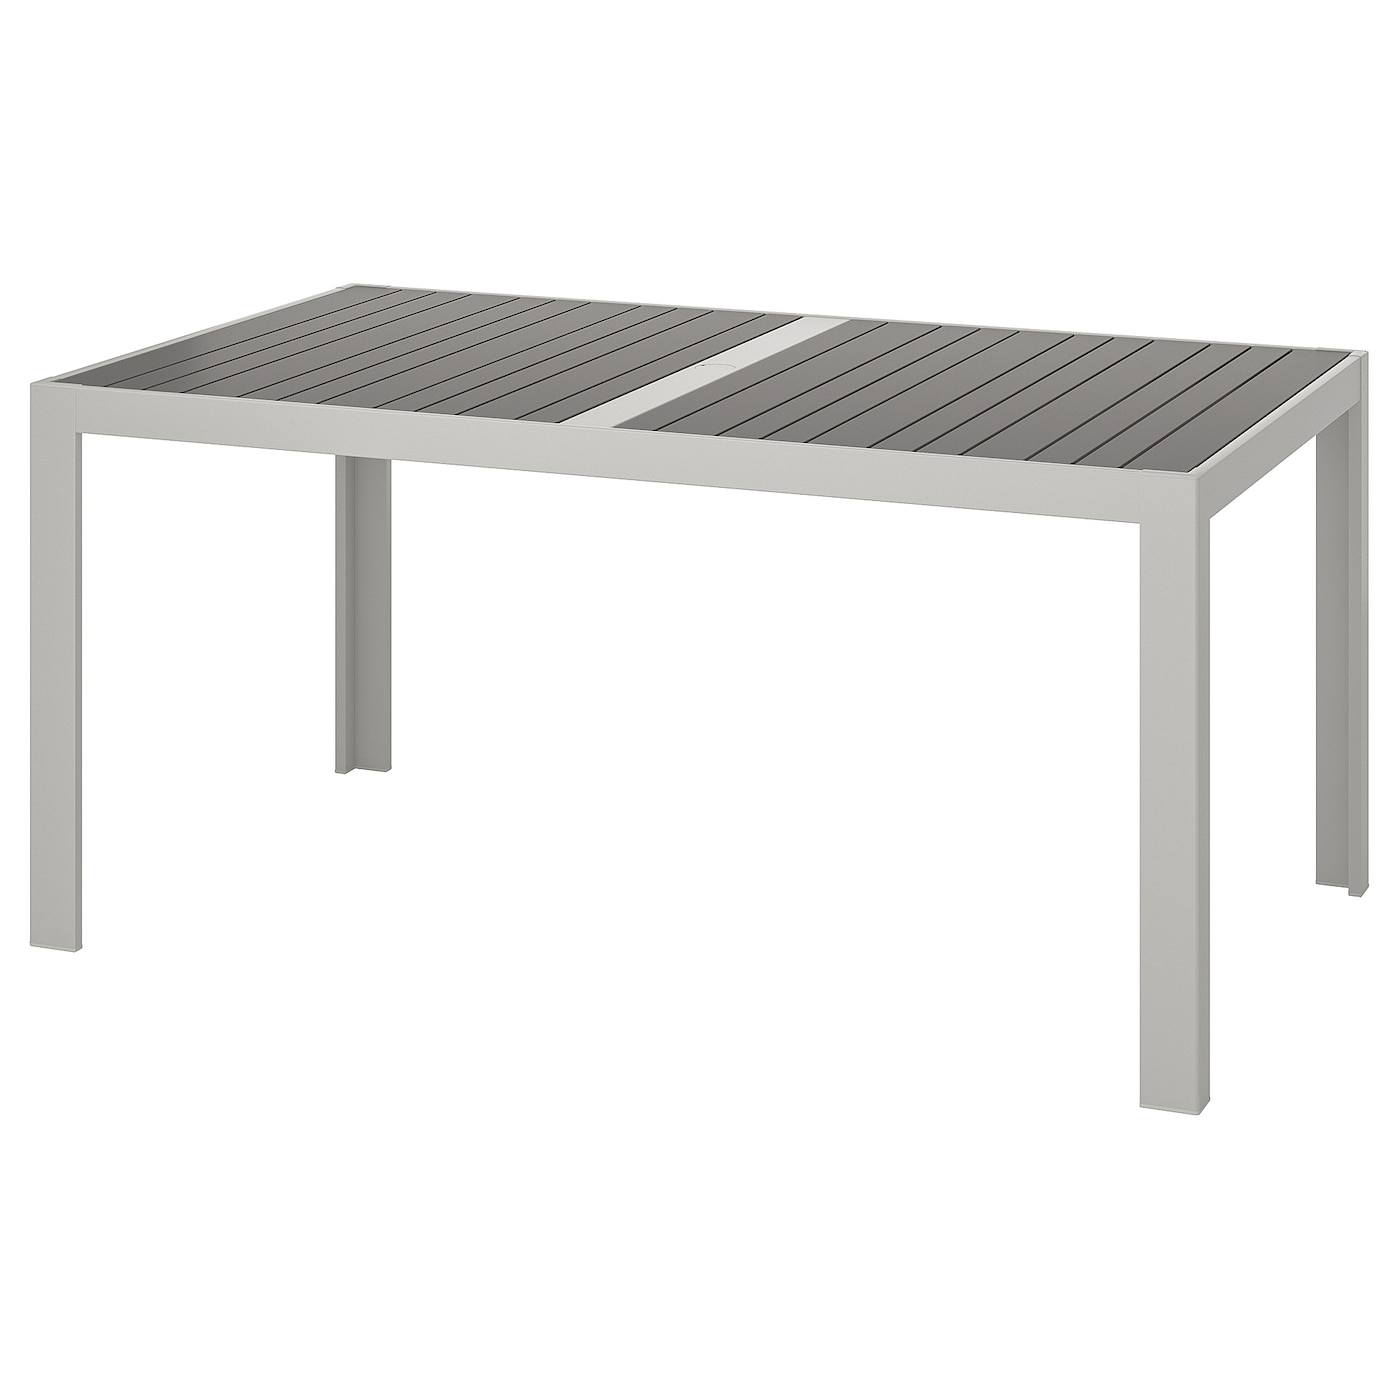 Sjlland Table Outdoor Dark Gray Light Gray intended for measurements 1400 X 1400